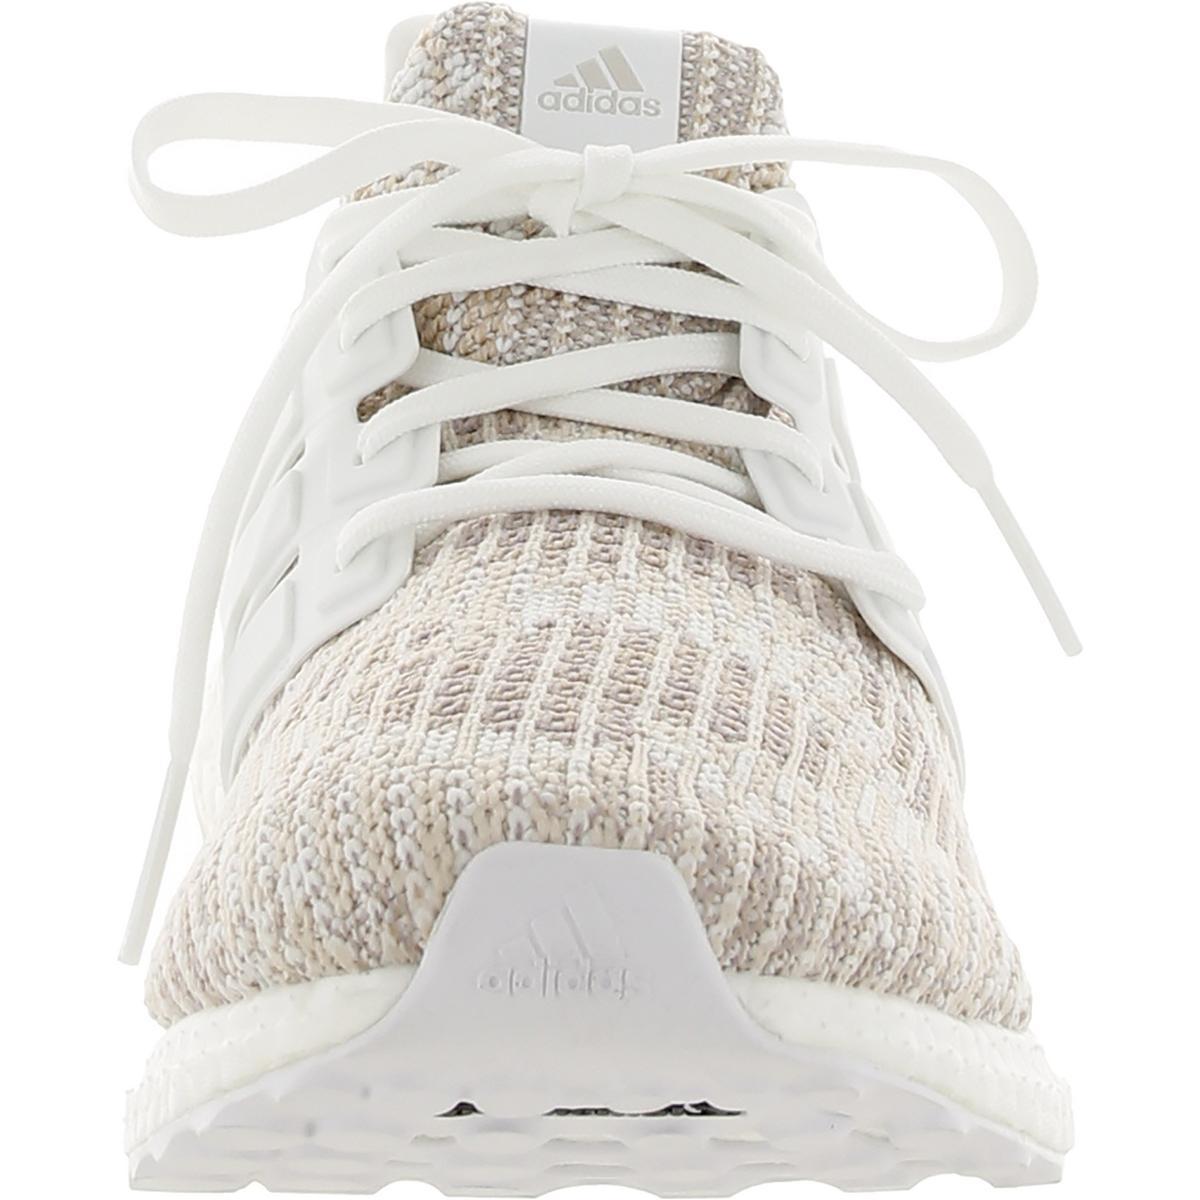 adidas Ultraboost 4.0 Dna Knit Trainers Running Shoes in White | Lyst